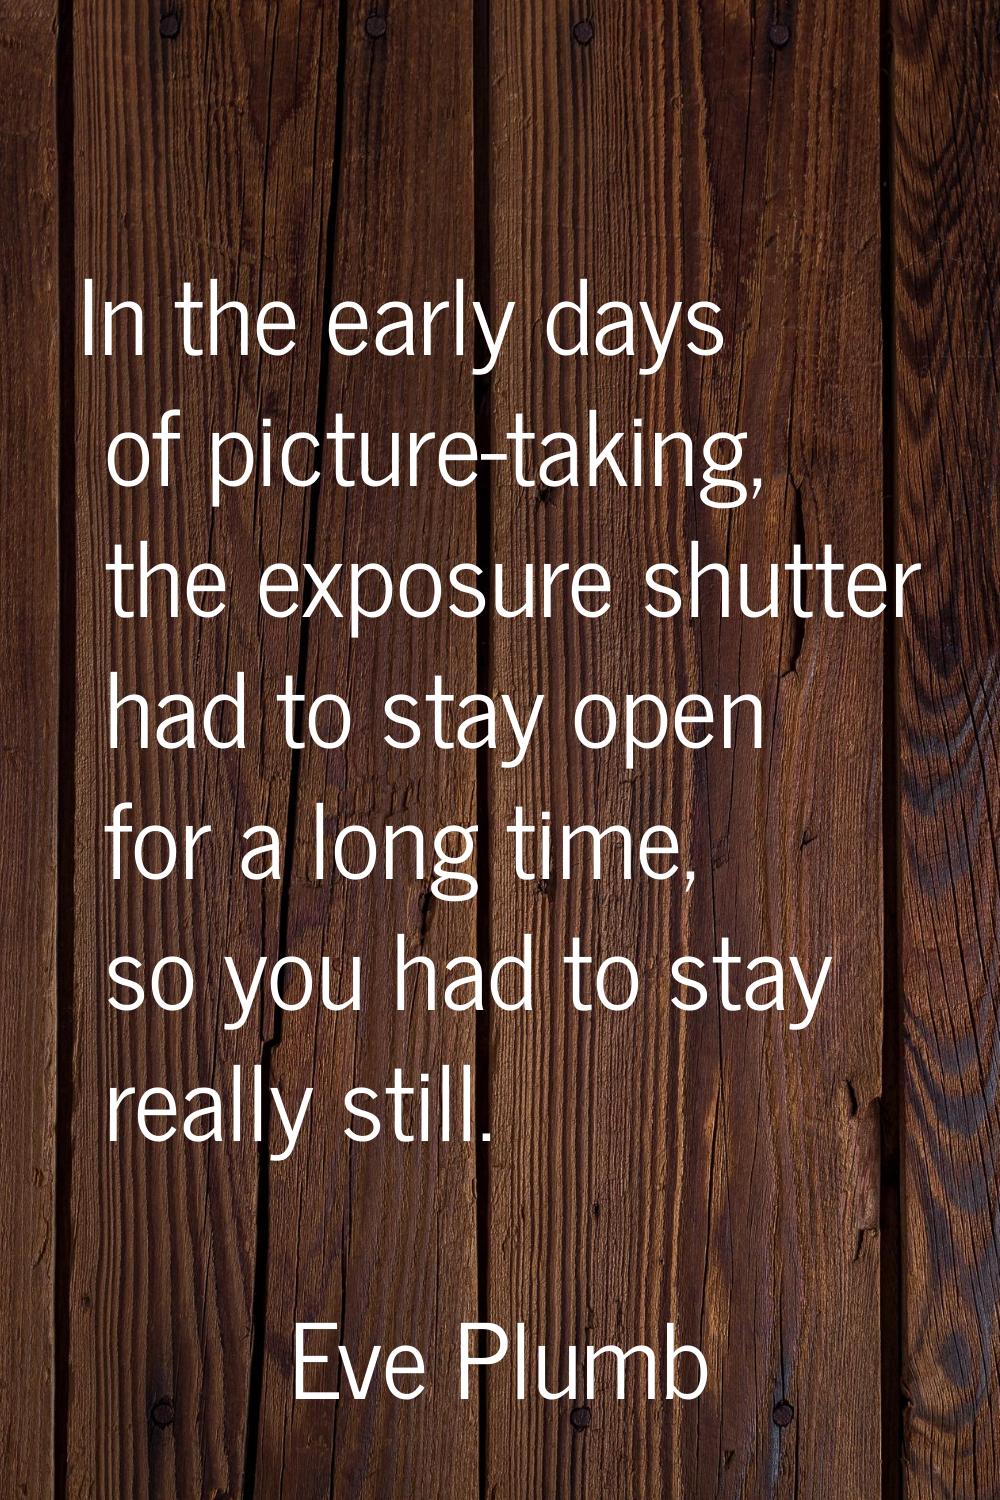 In the early days of picture-taking, the exposure shutter had to stay open for a long time, so you 